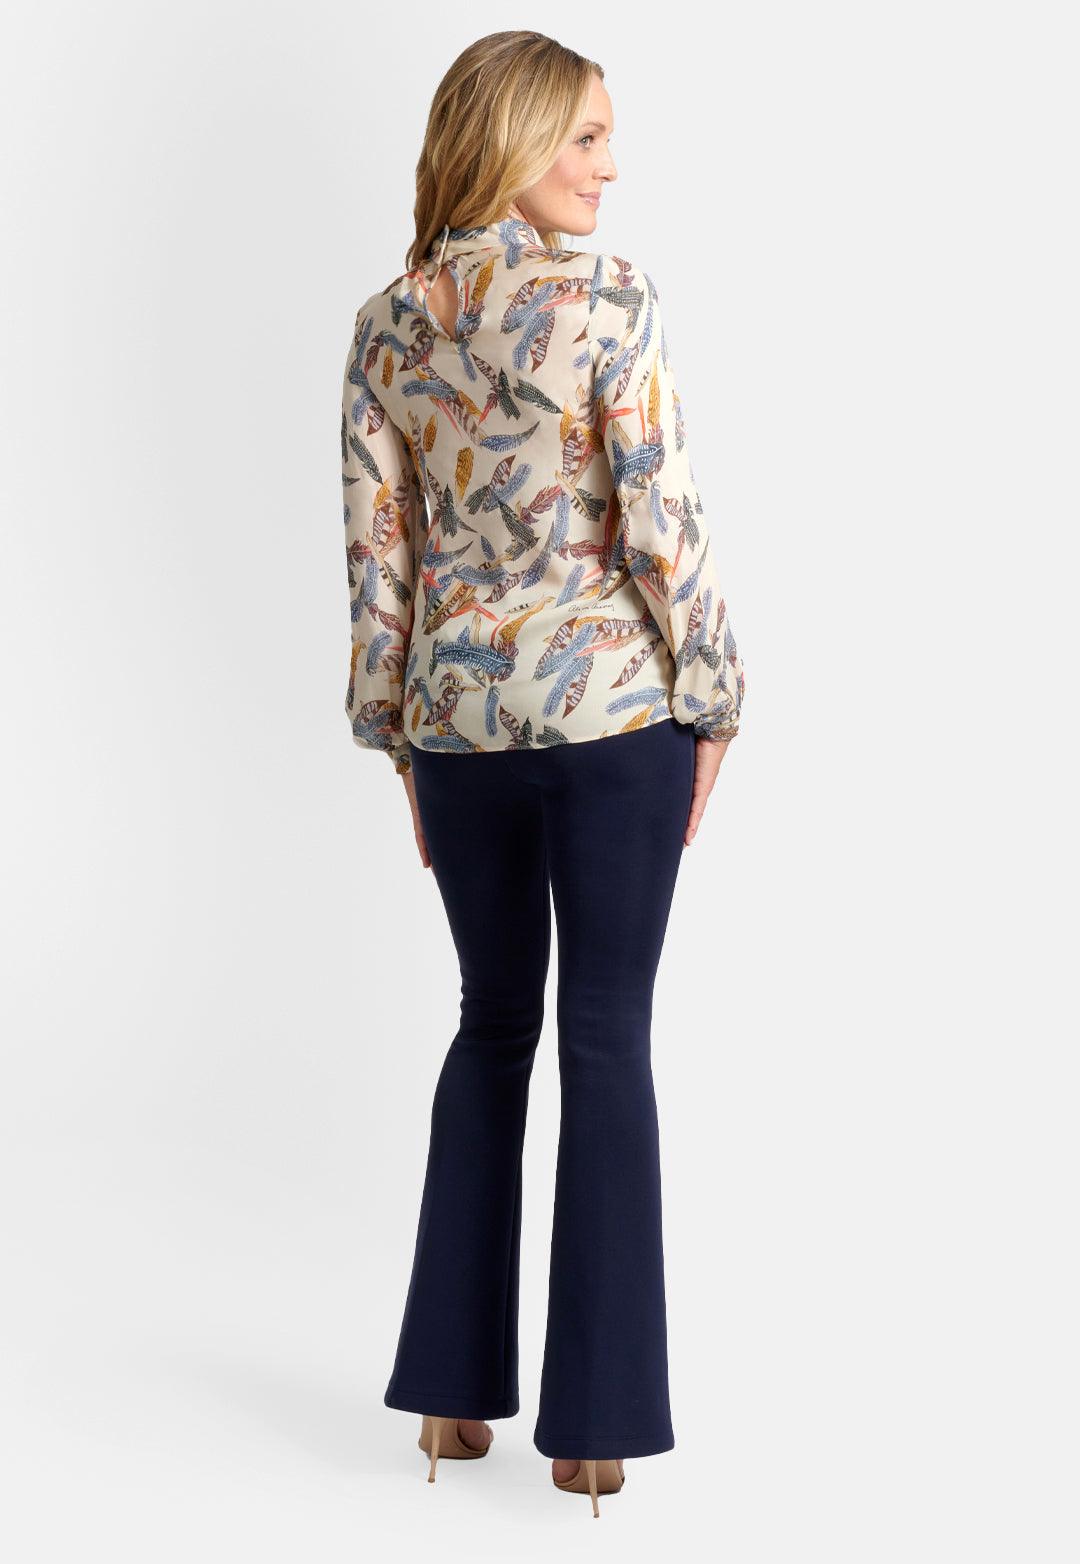 Model wearing creme silk high neck long sleeve blouse top printed with feathers and stretch knit navy pants